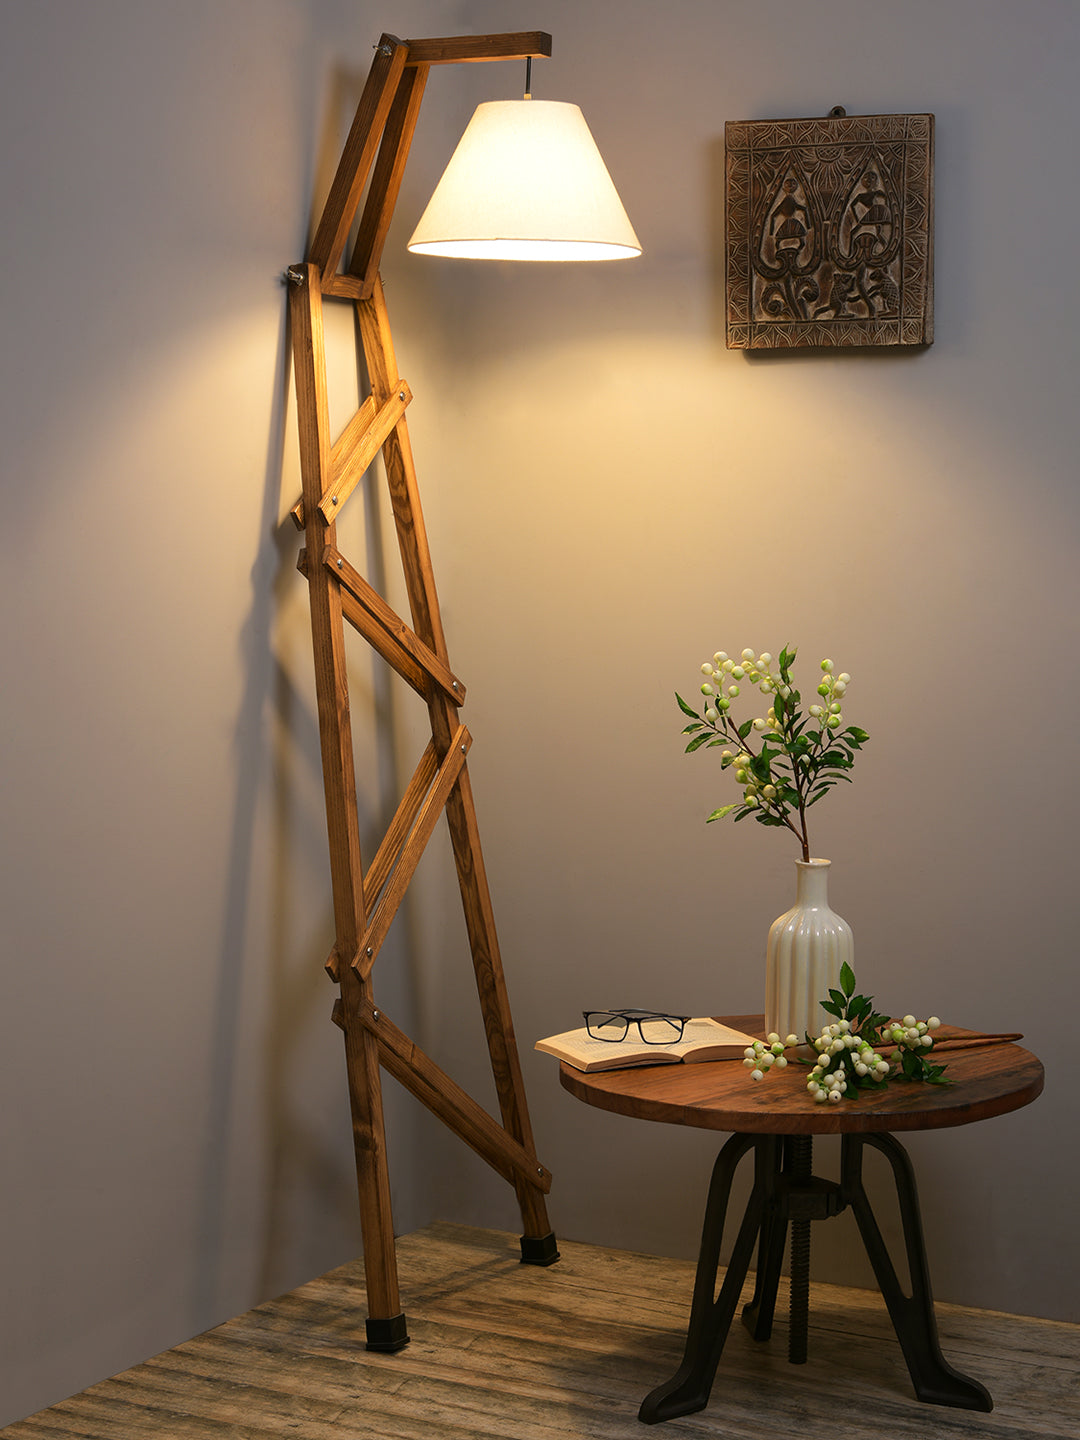 The Enlightened Man – Wall Leaning Floor Lamp